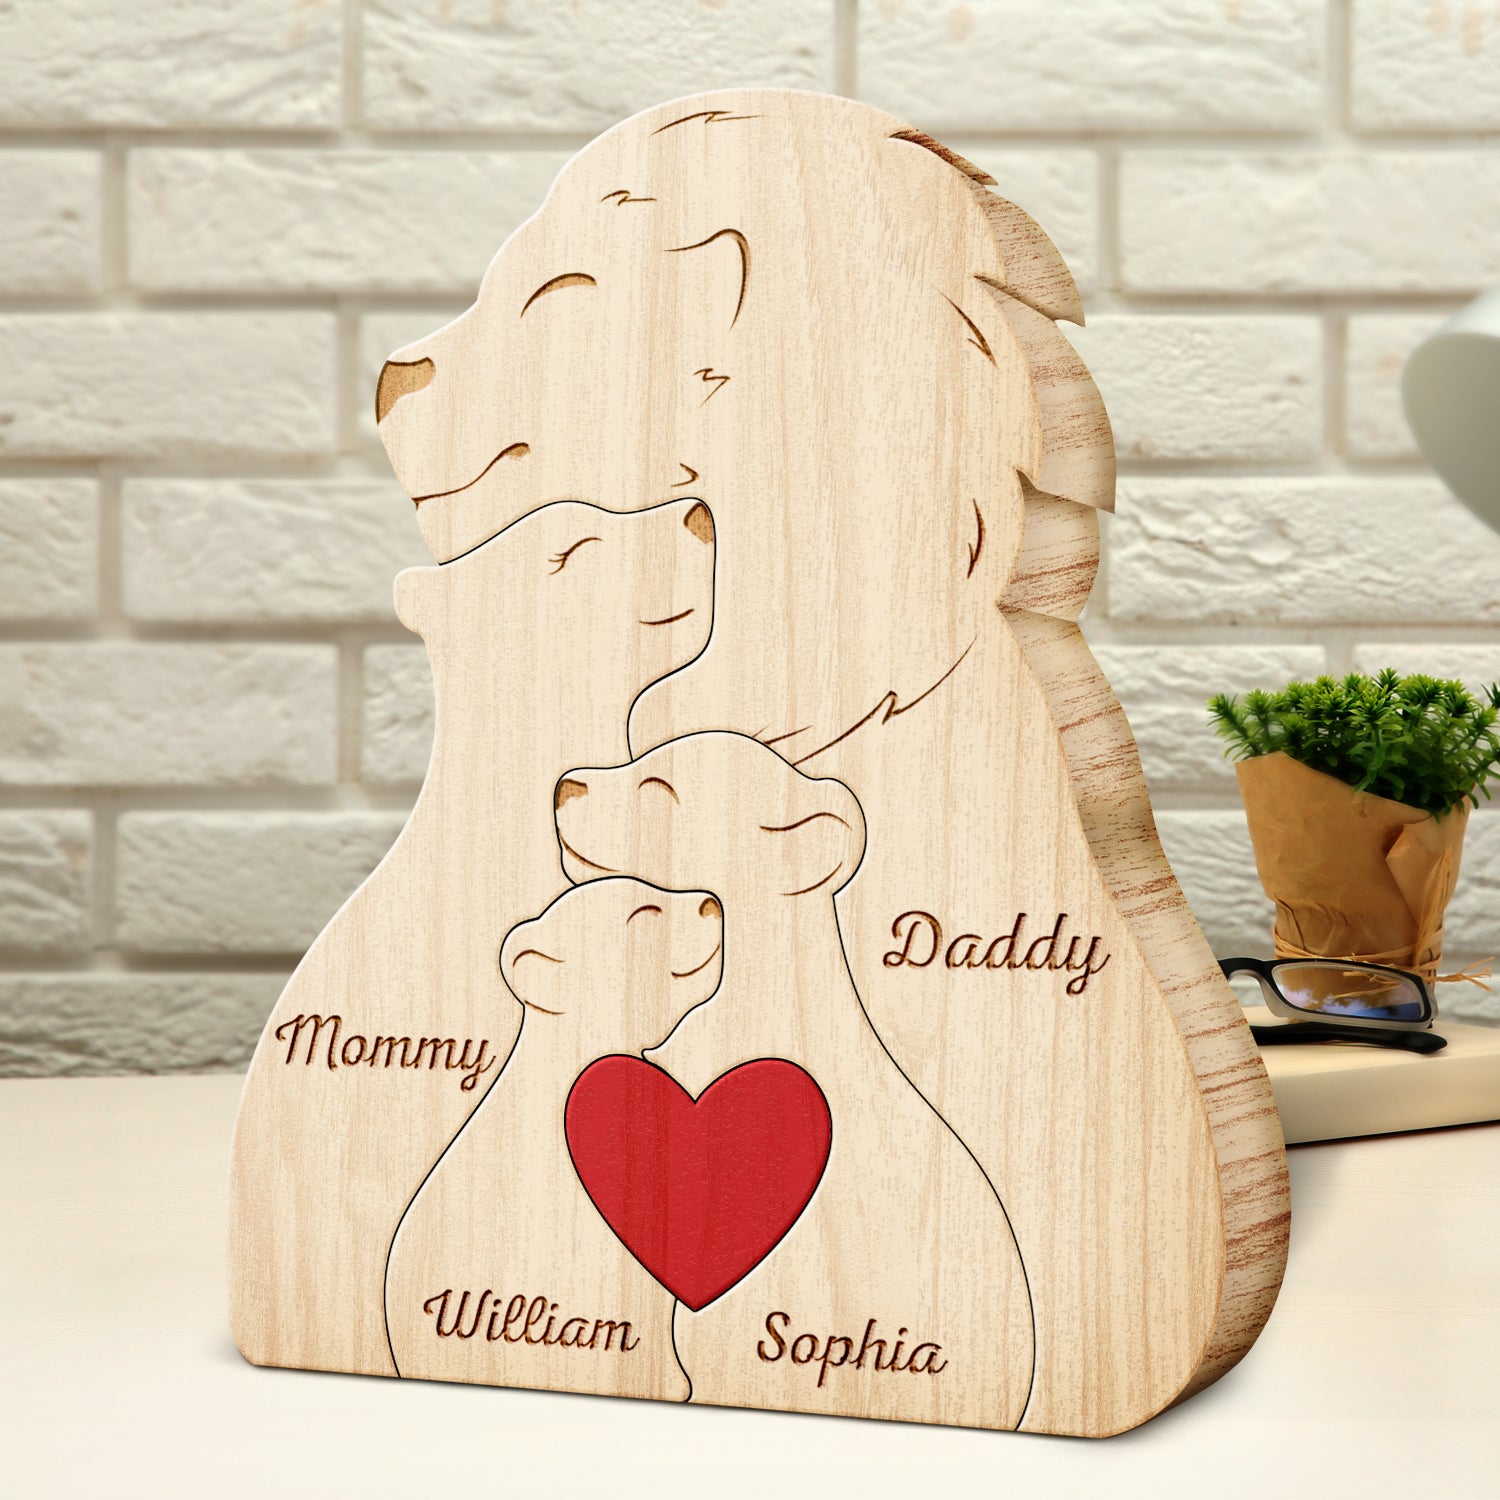 Family Lions - Gift For Parents, Father, Mother - Personalized Custom Shaped Wooden Puzzle